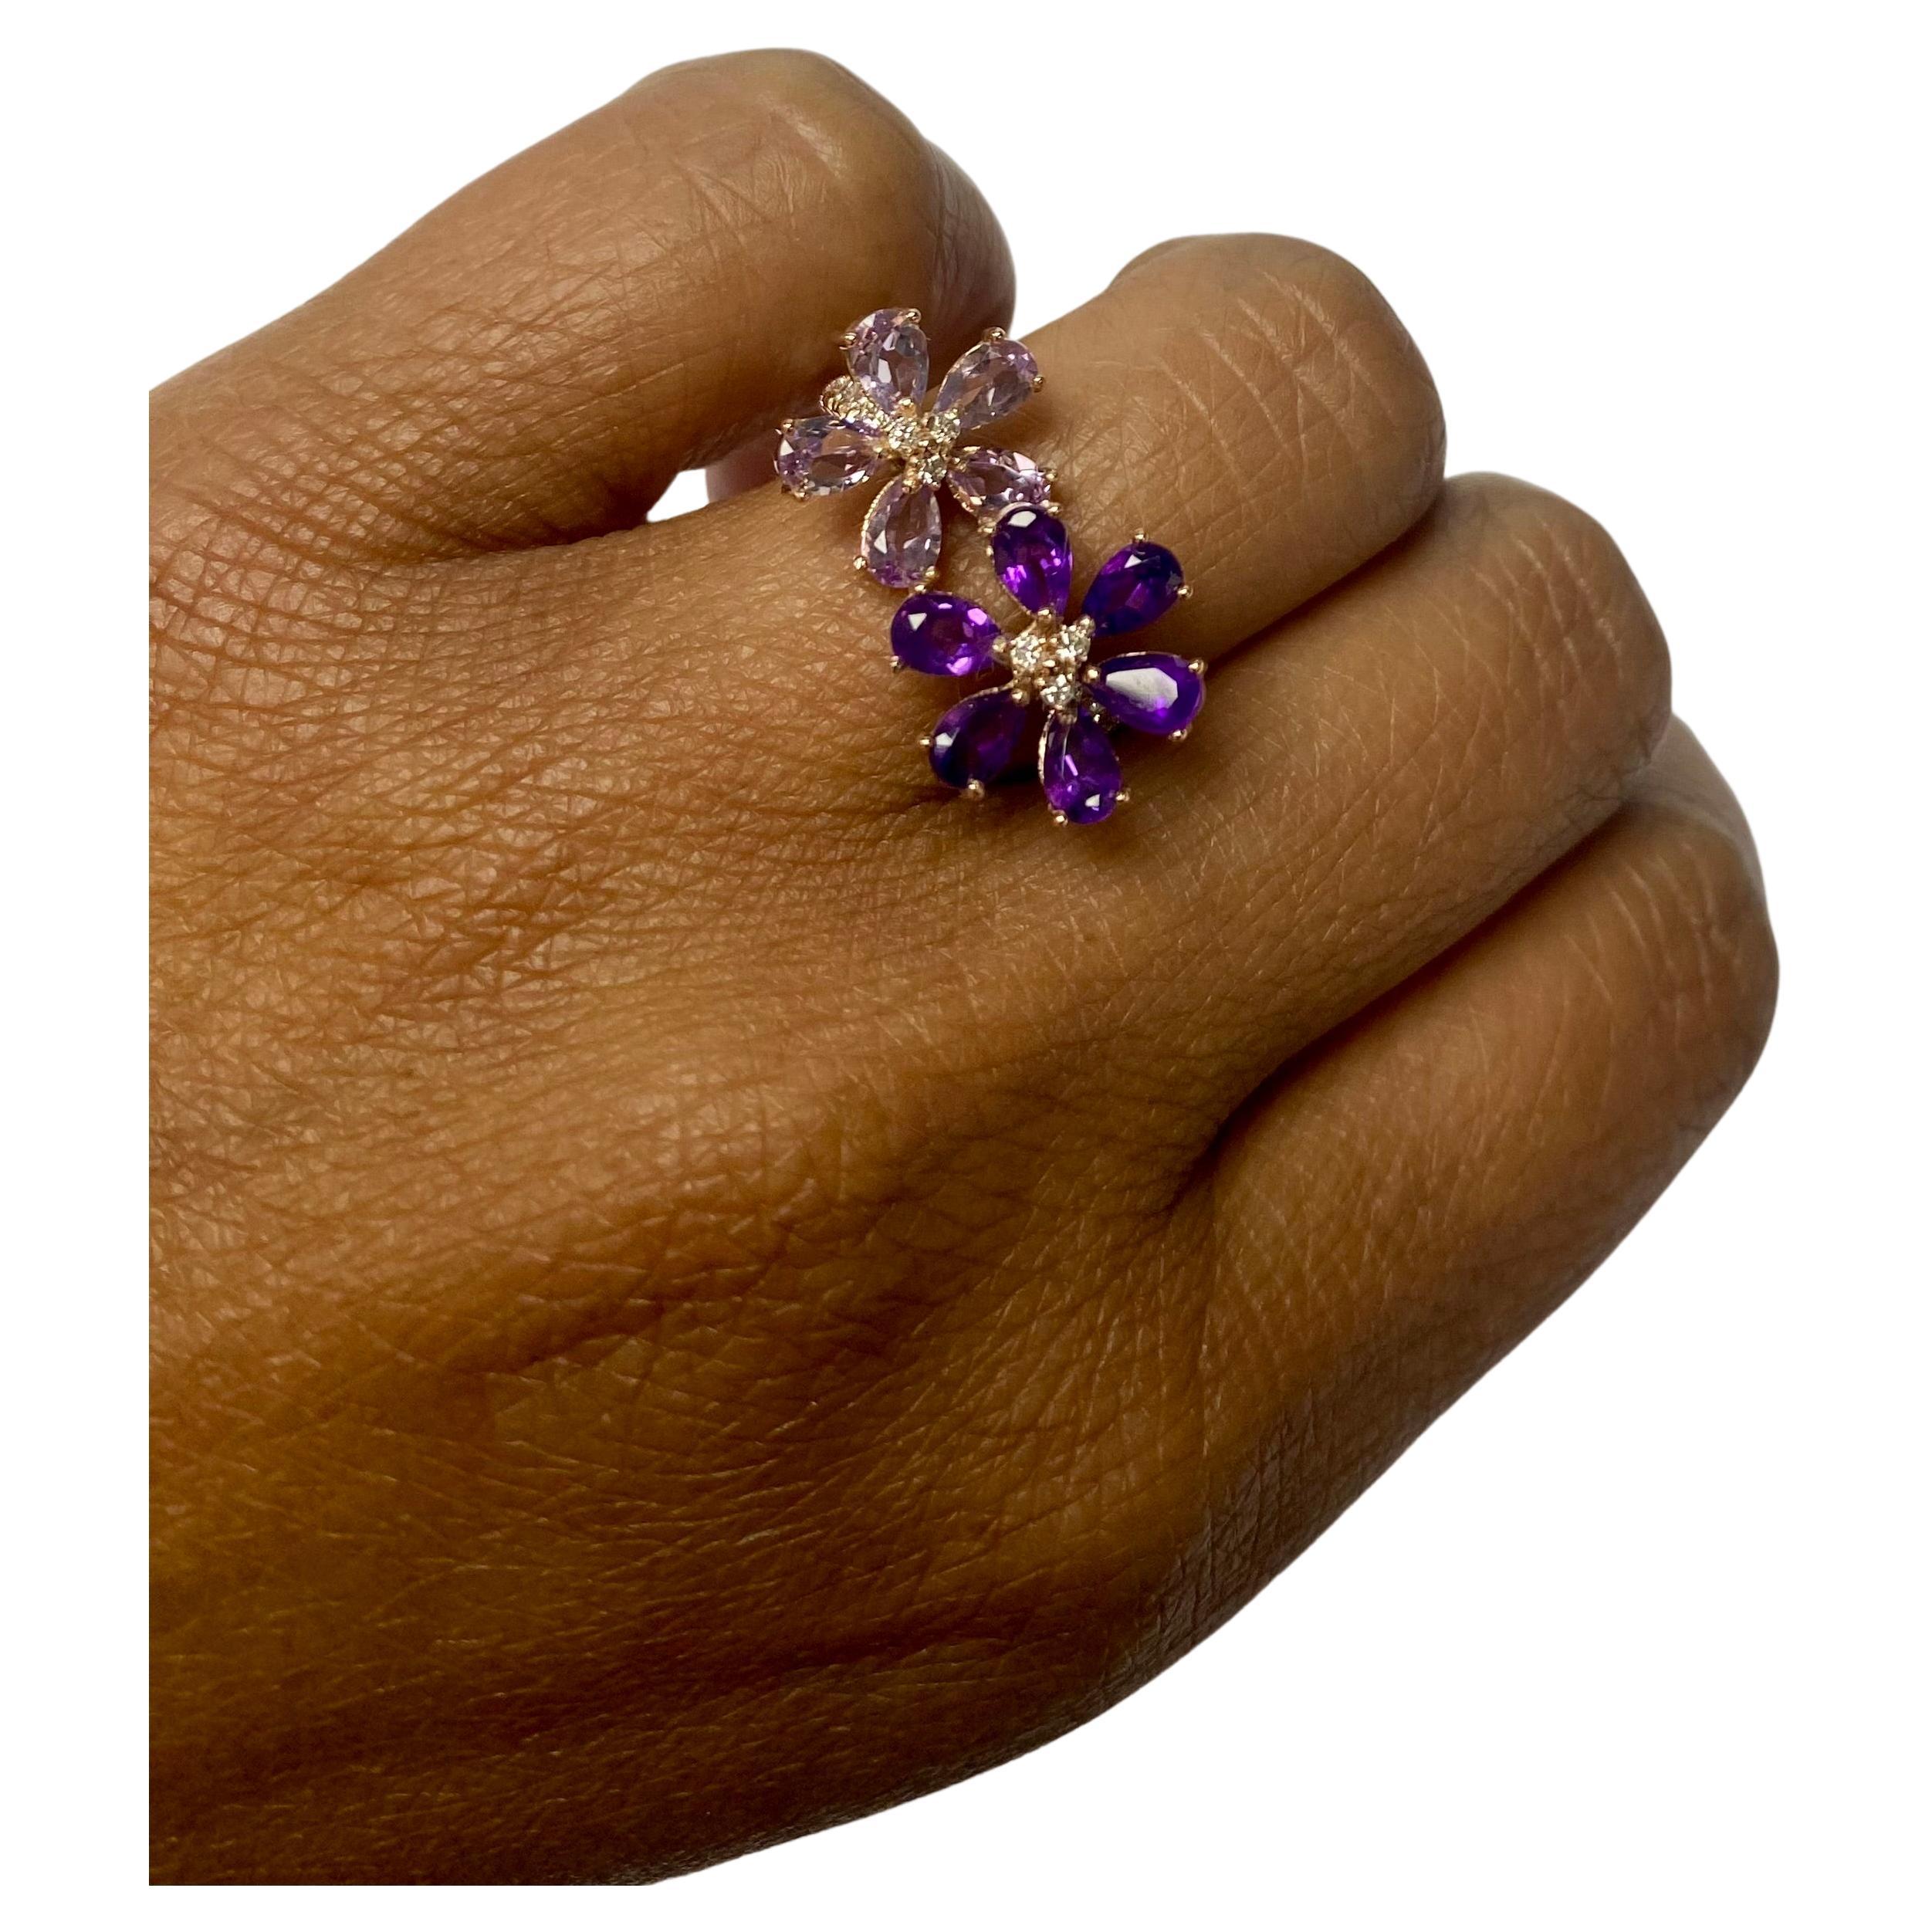 2.25 Carat Pear Cut Amethyst Diamond Rose Gold Cocktail Ring For Sale 1